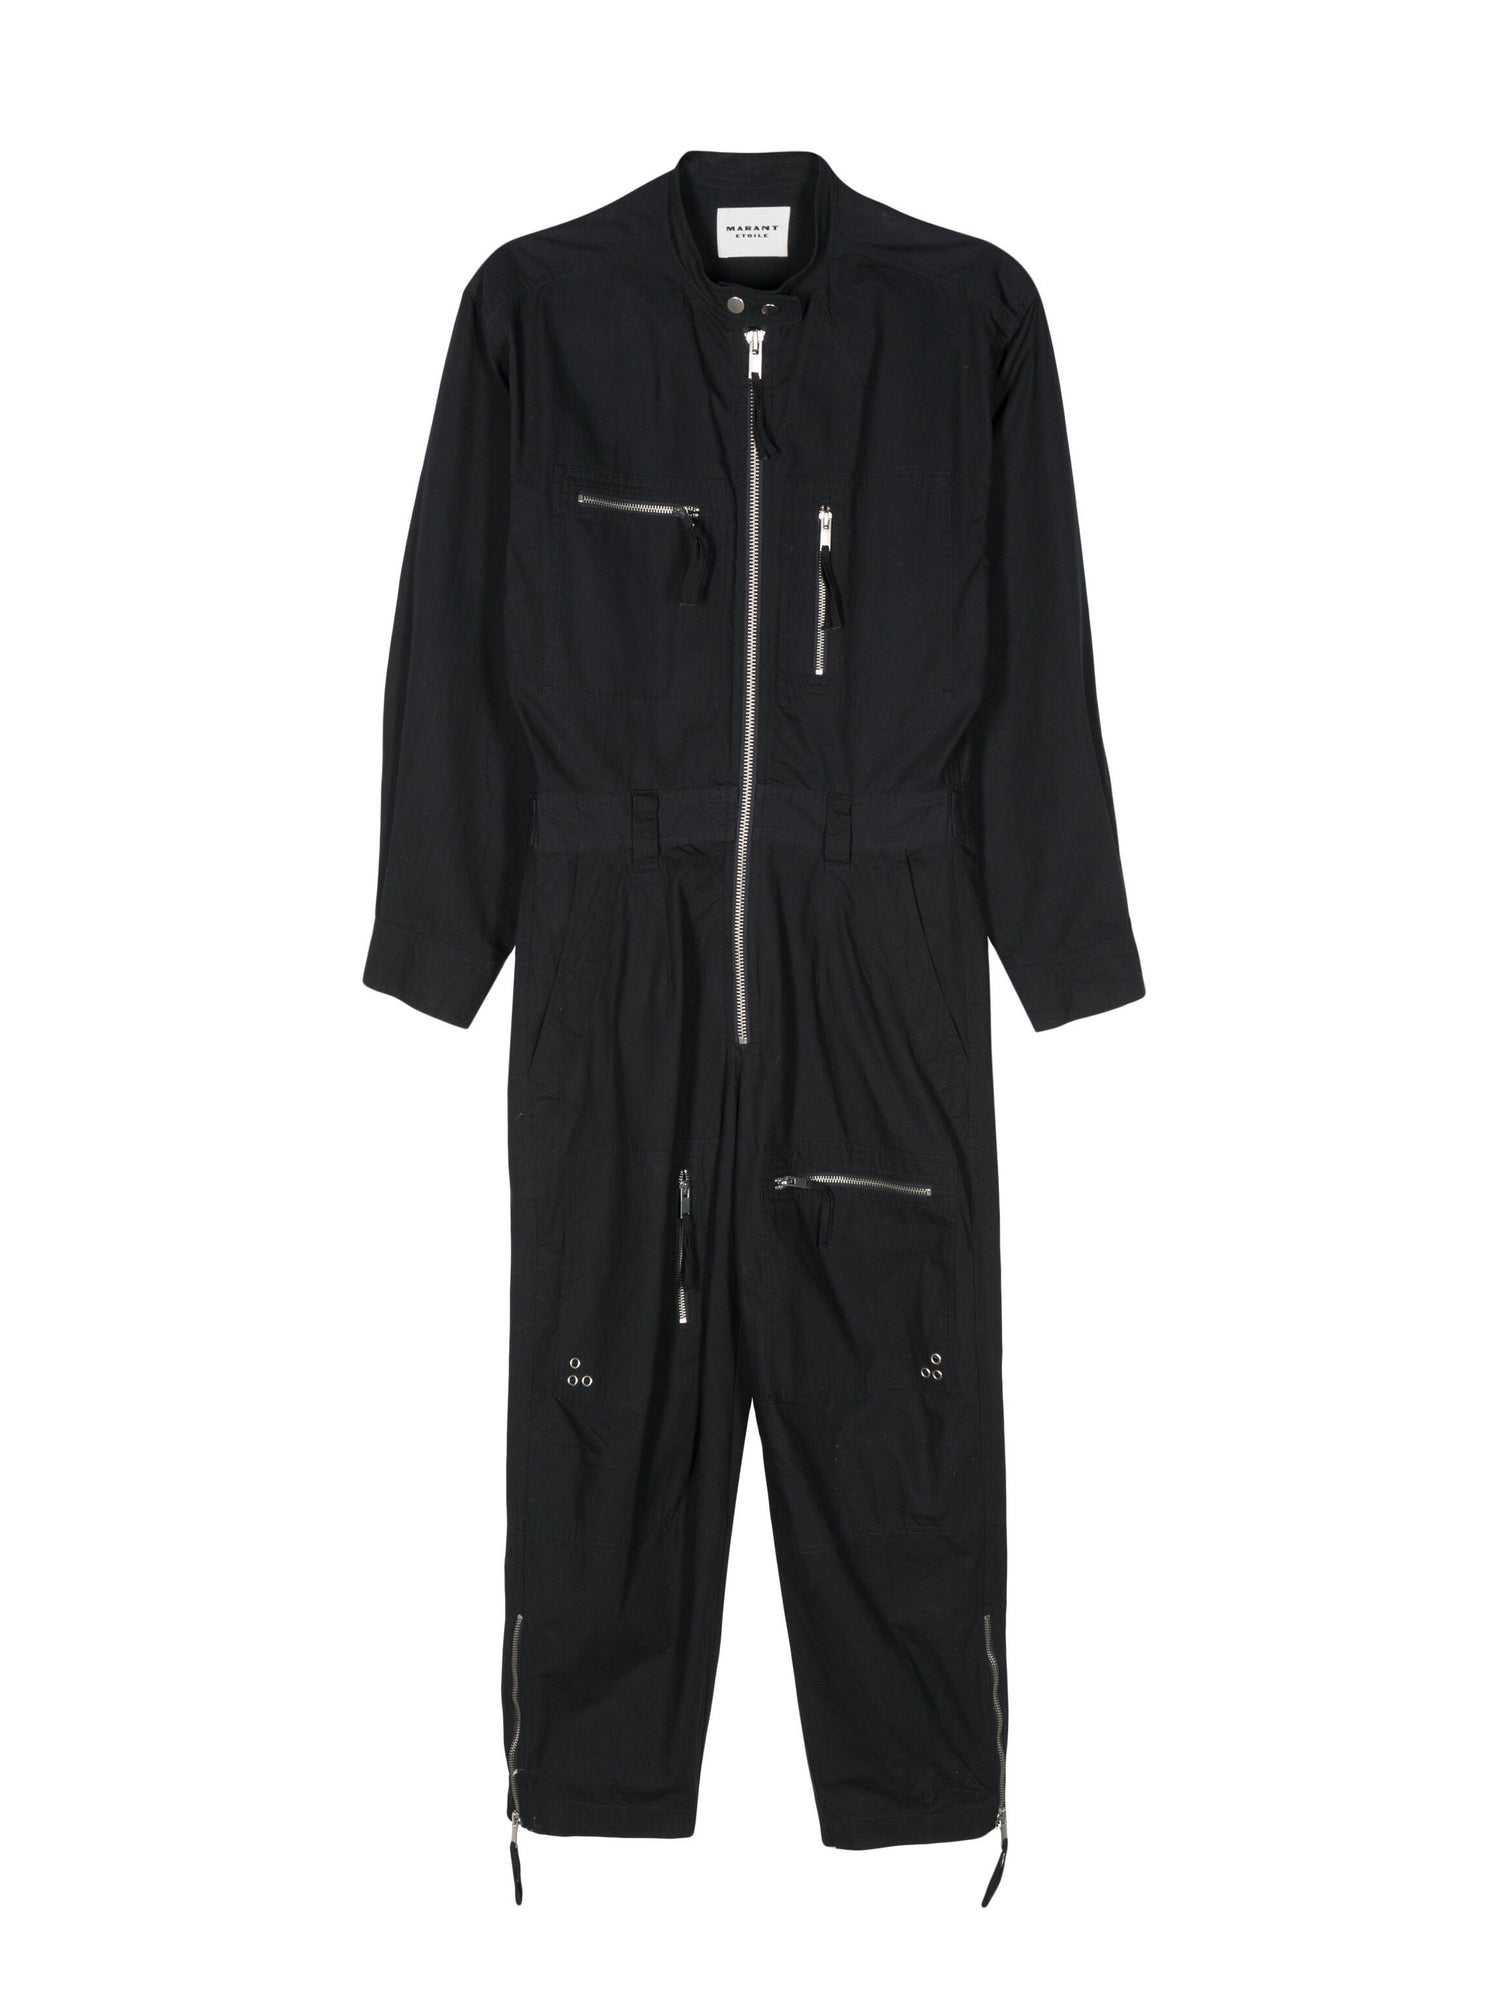 KARLY jumpsuit, faded black